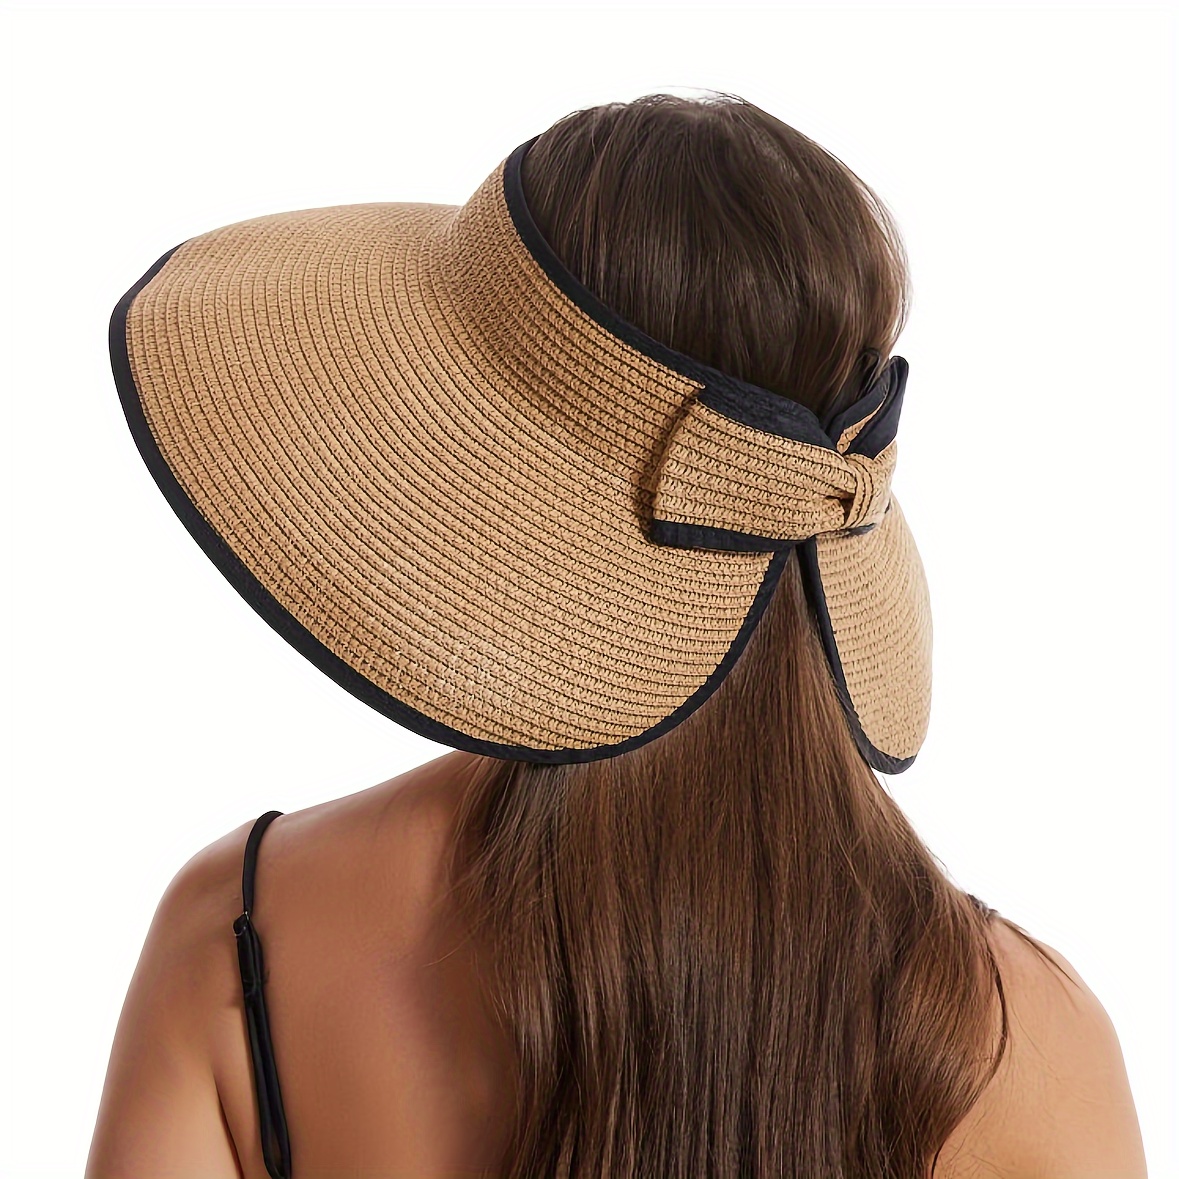 

Women's Summer Sun Visor Hat, Solid Color Straw Hat With Black Trim, Foldable Portable Open Top Wide Brim Cap For Uv Protection